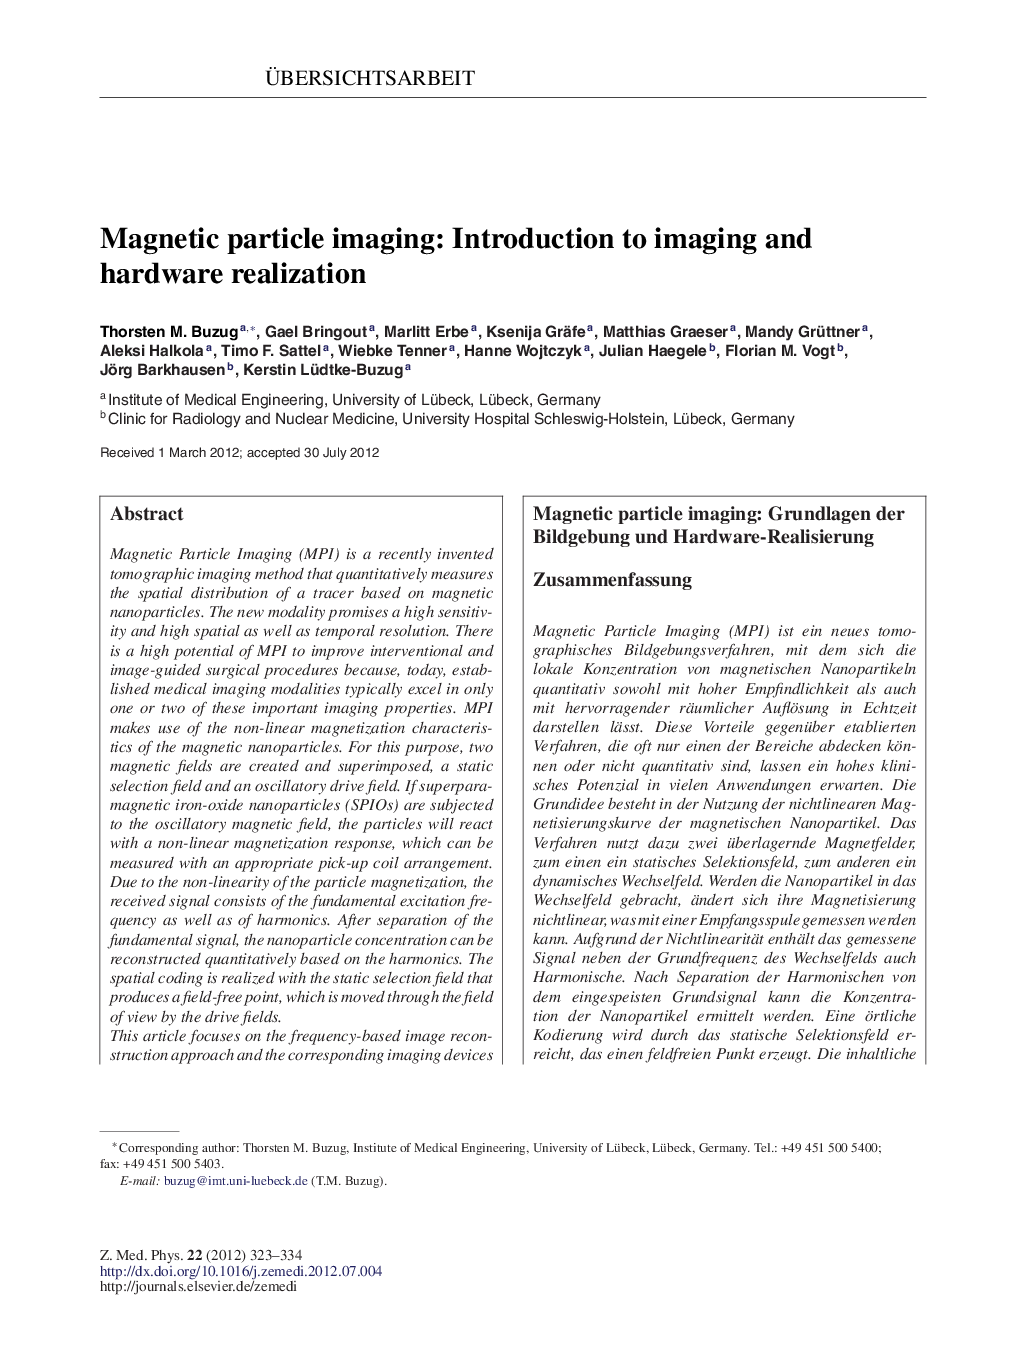 Magnetic particle imaging: Introduction to imaging and hardware realization